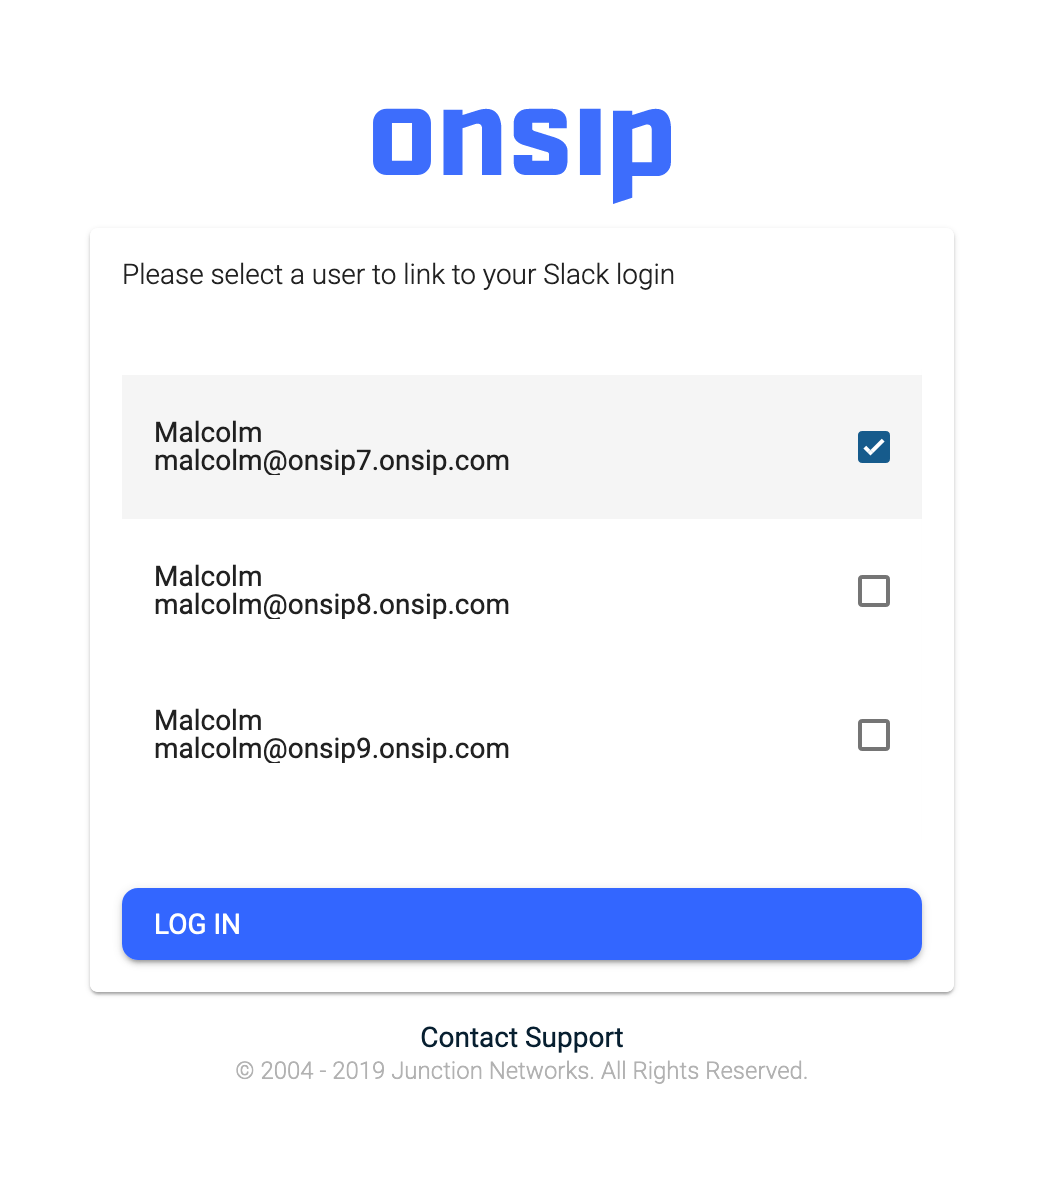 removing voicemail from onsip account